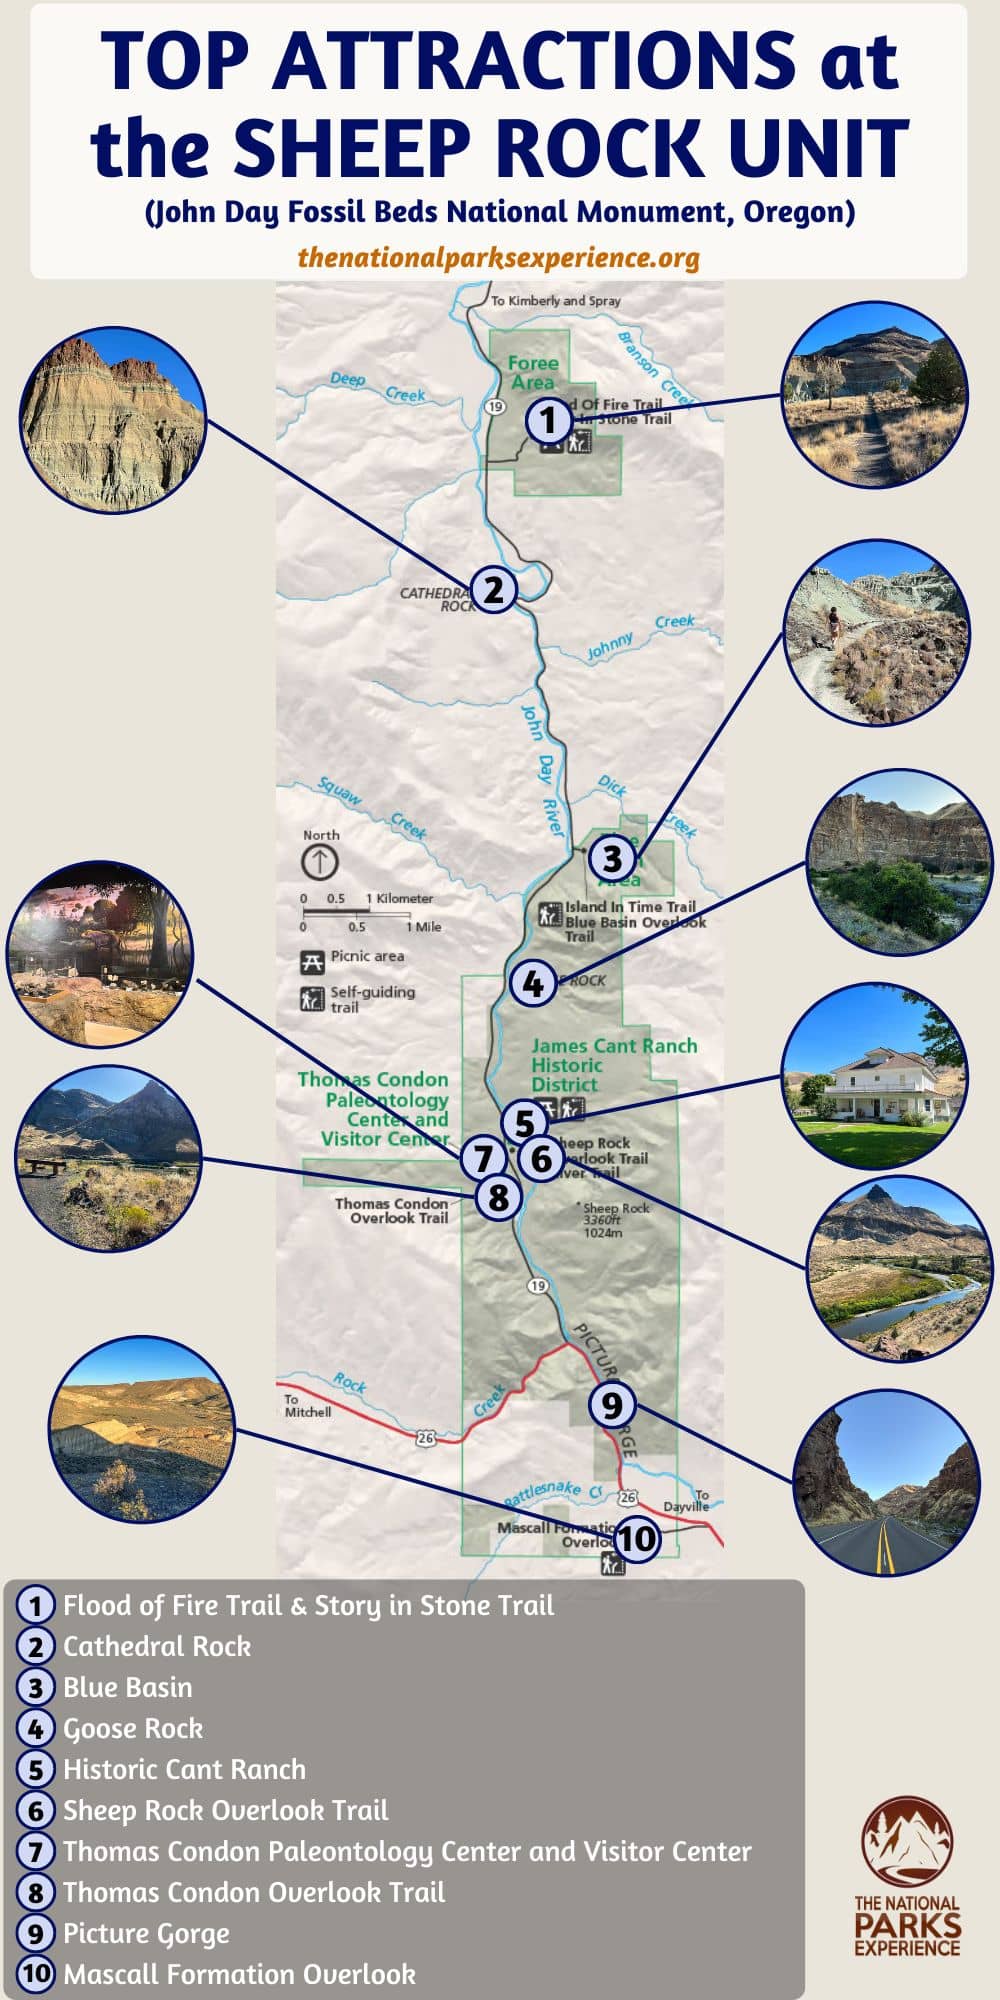 Map of Top Attractions at Sheep Rock Unit, John Day Fossil Beds National Monument